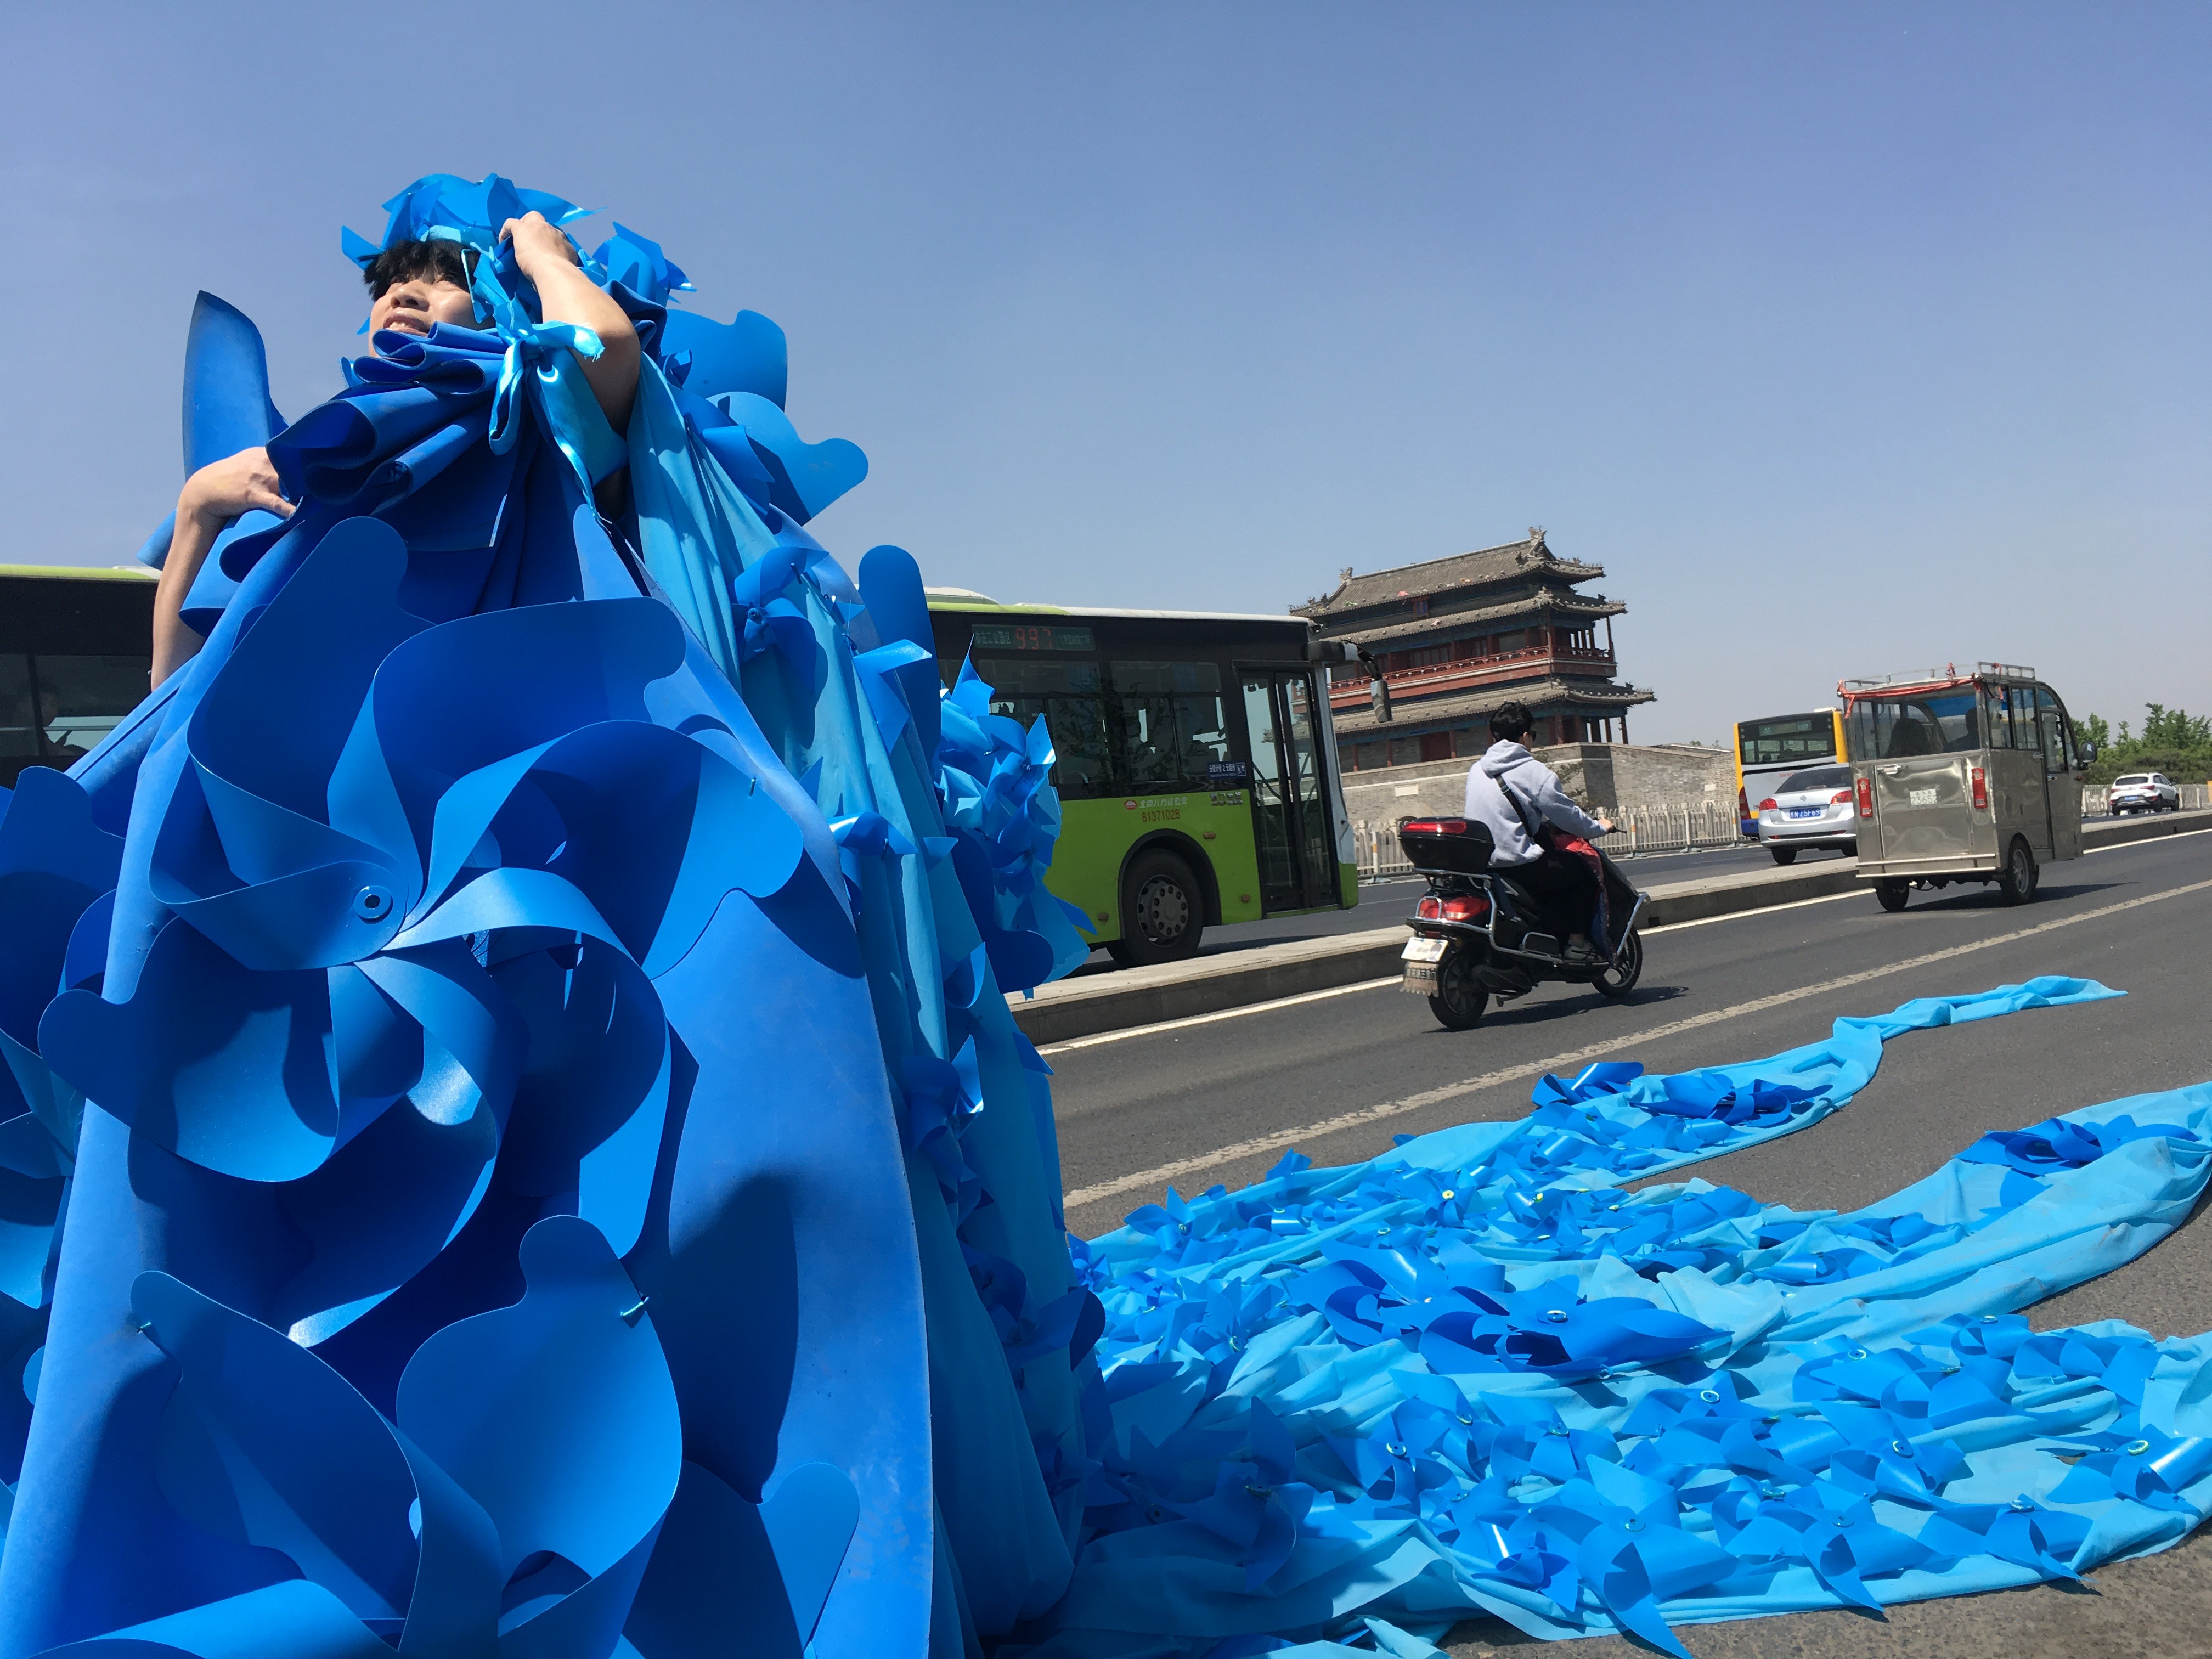 Kong Ning in a dress made of blue pinwheels in Beijing in 2017. She created this dress in the hope the wheels would blow the smog away.